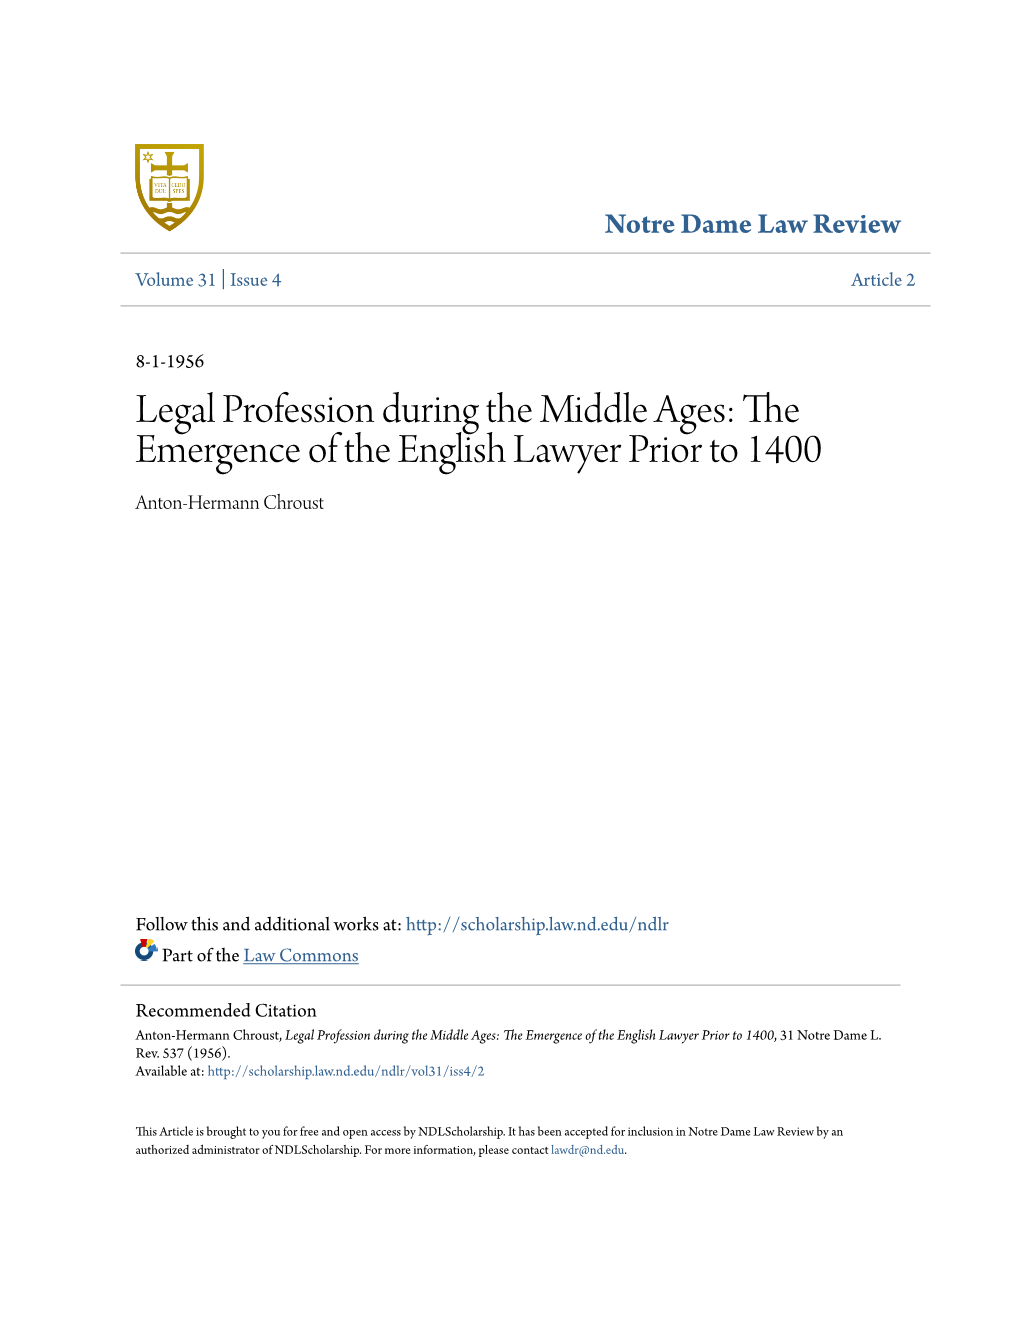 Legal Profession During the Middle Ages: the Emergence of the English Lawyer Prior to 1400 Anton-Hermann Chroust